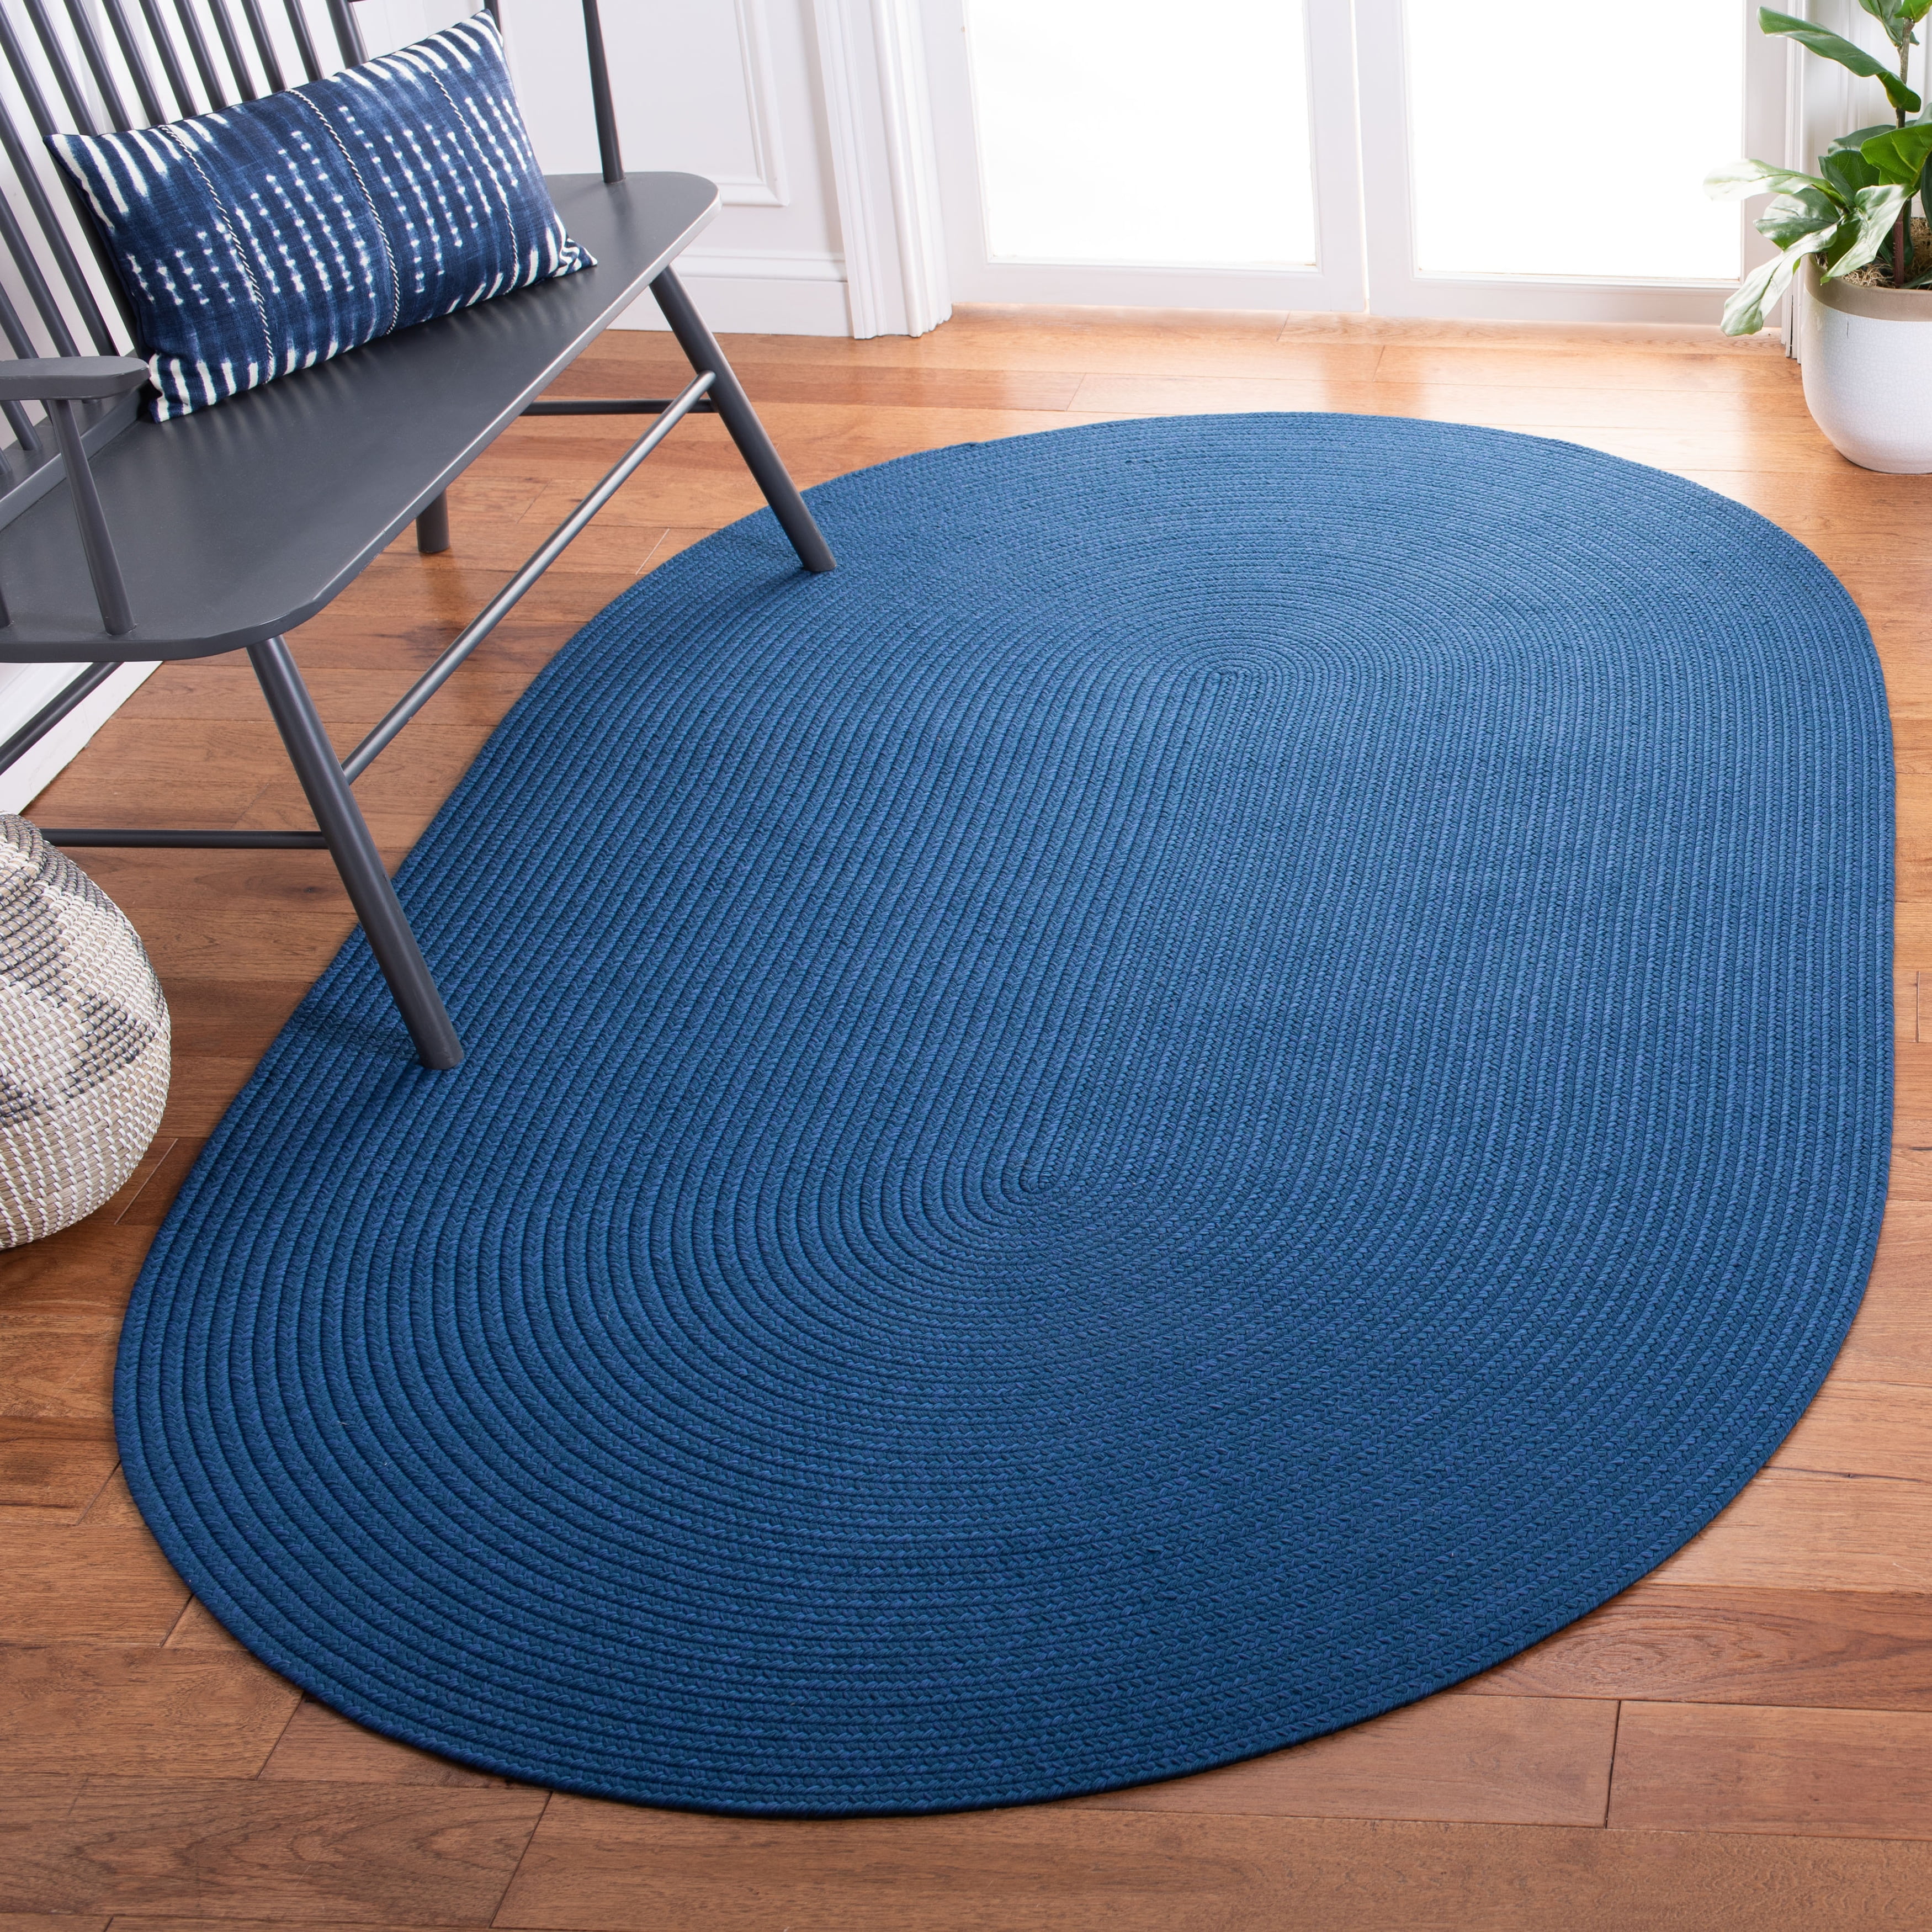 Traditional 2' x 5' Oval Farmhouse Braided Rug Handcrafted Indoor Outdoor Geometric Ombre Pattern Textured Reversible Durable Flat Braid Colorful Green Deep Blue Area Rug for Bedroom Living Room 